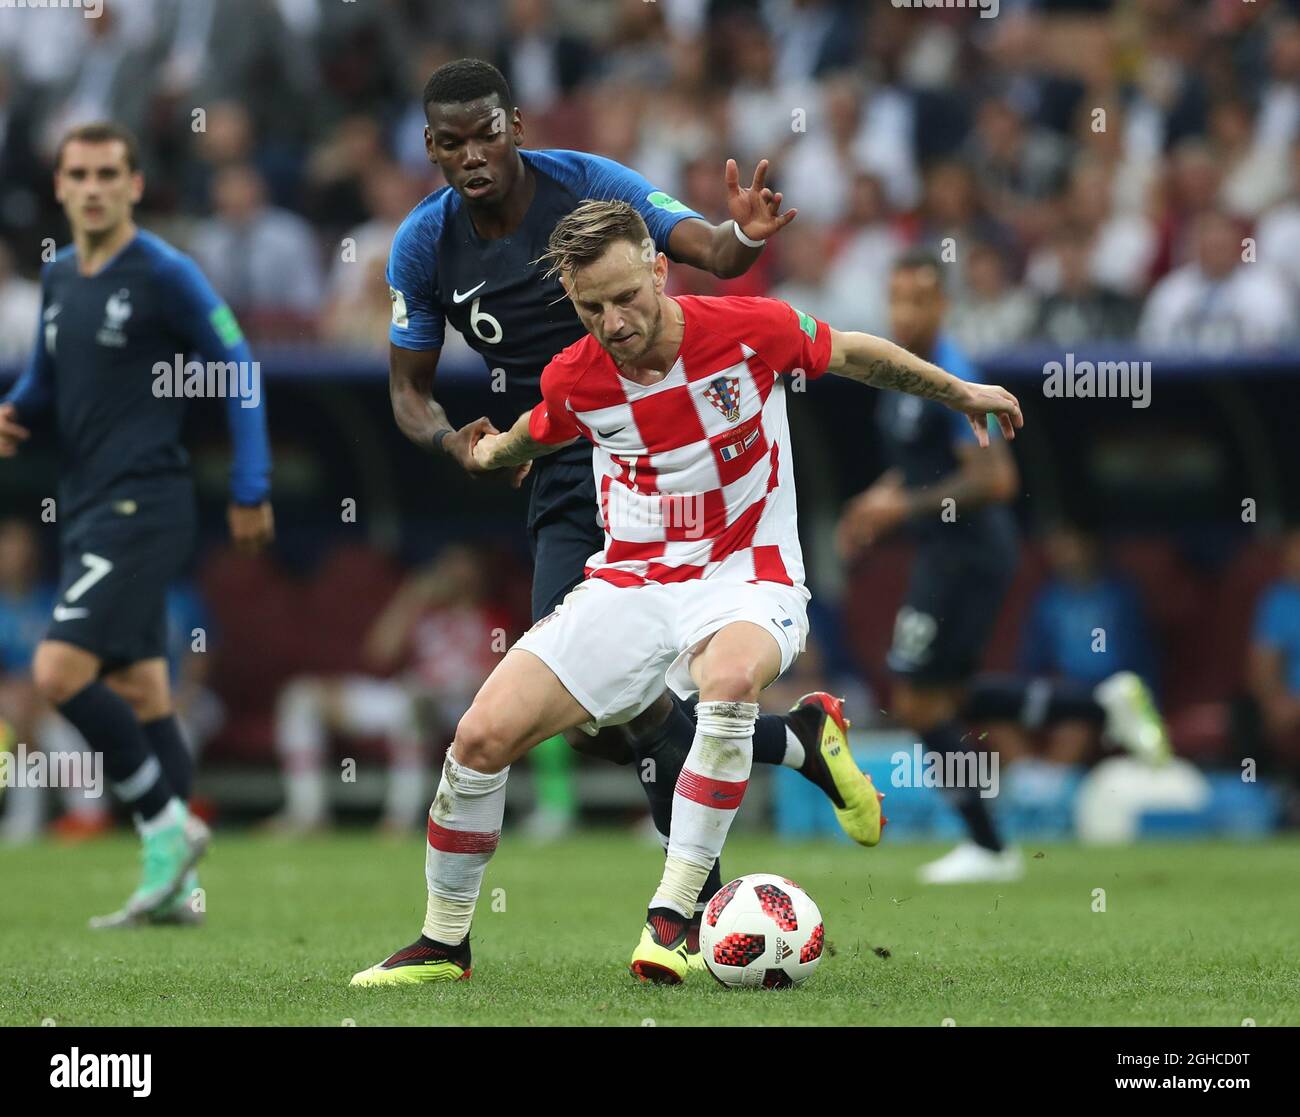 Paul Pogba of France tackles Ivan Rakitic of Croatia during the FIFA World Cup 2018 Final at the Luzhniki Stadium, Moscow. Picture date 15th July 2018. Picture credit should read: David Klein/Sportimage via PA Images Stock Photo